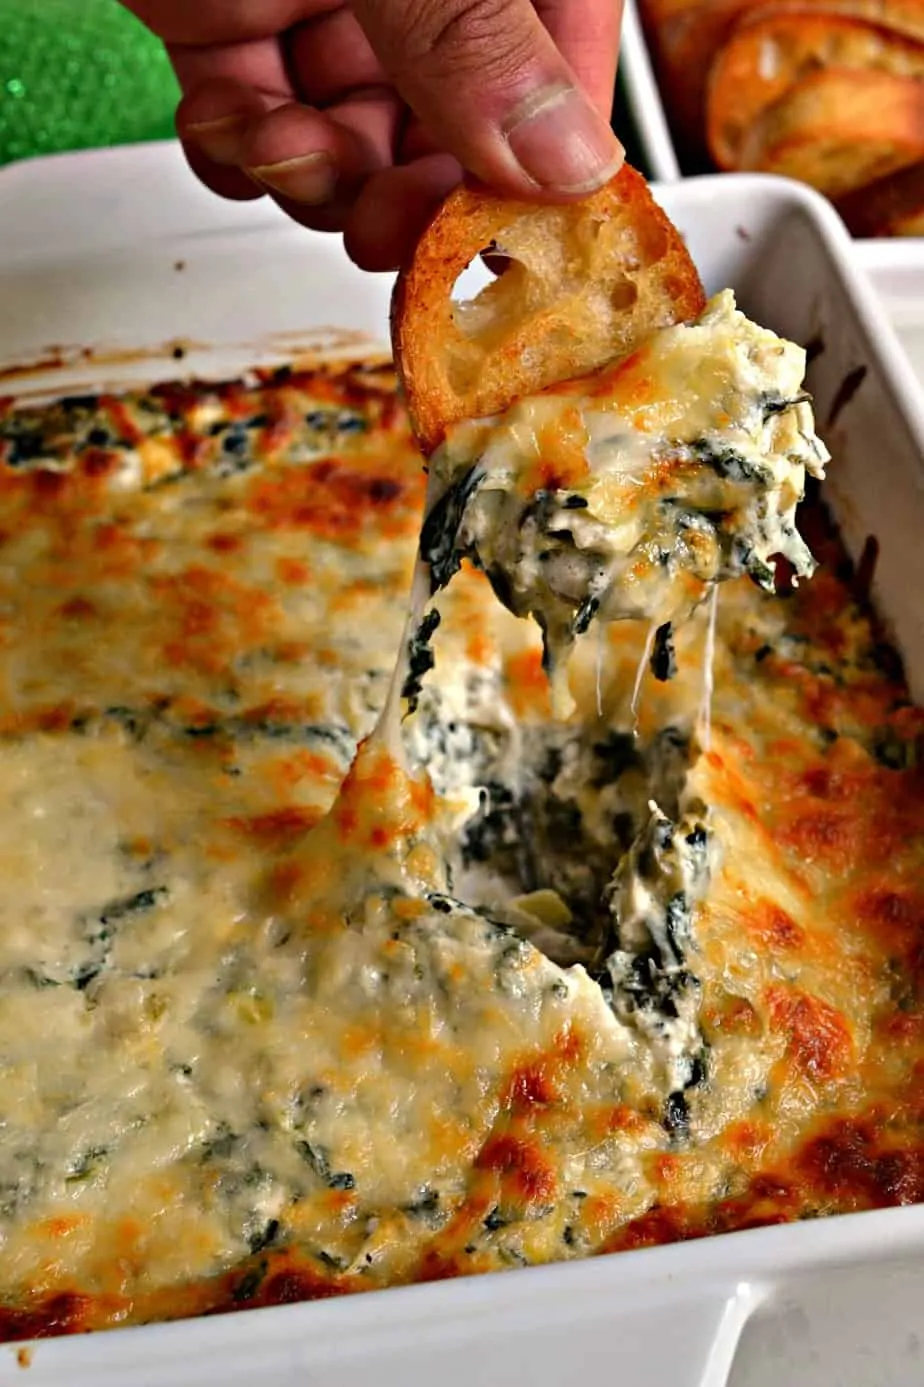 This Hot Spinach Artichoke Dip is a creamy cheesy delectable dip with garlic, Parmesan cheese, spinach and artichoke hearts.